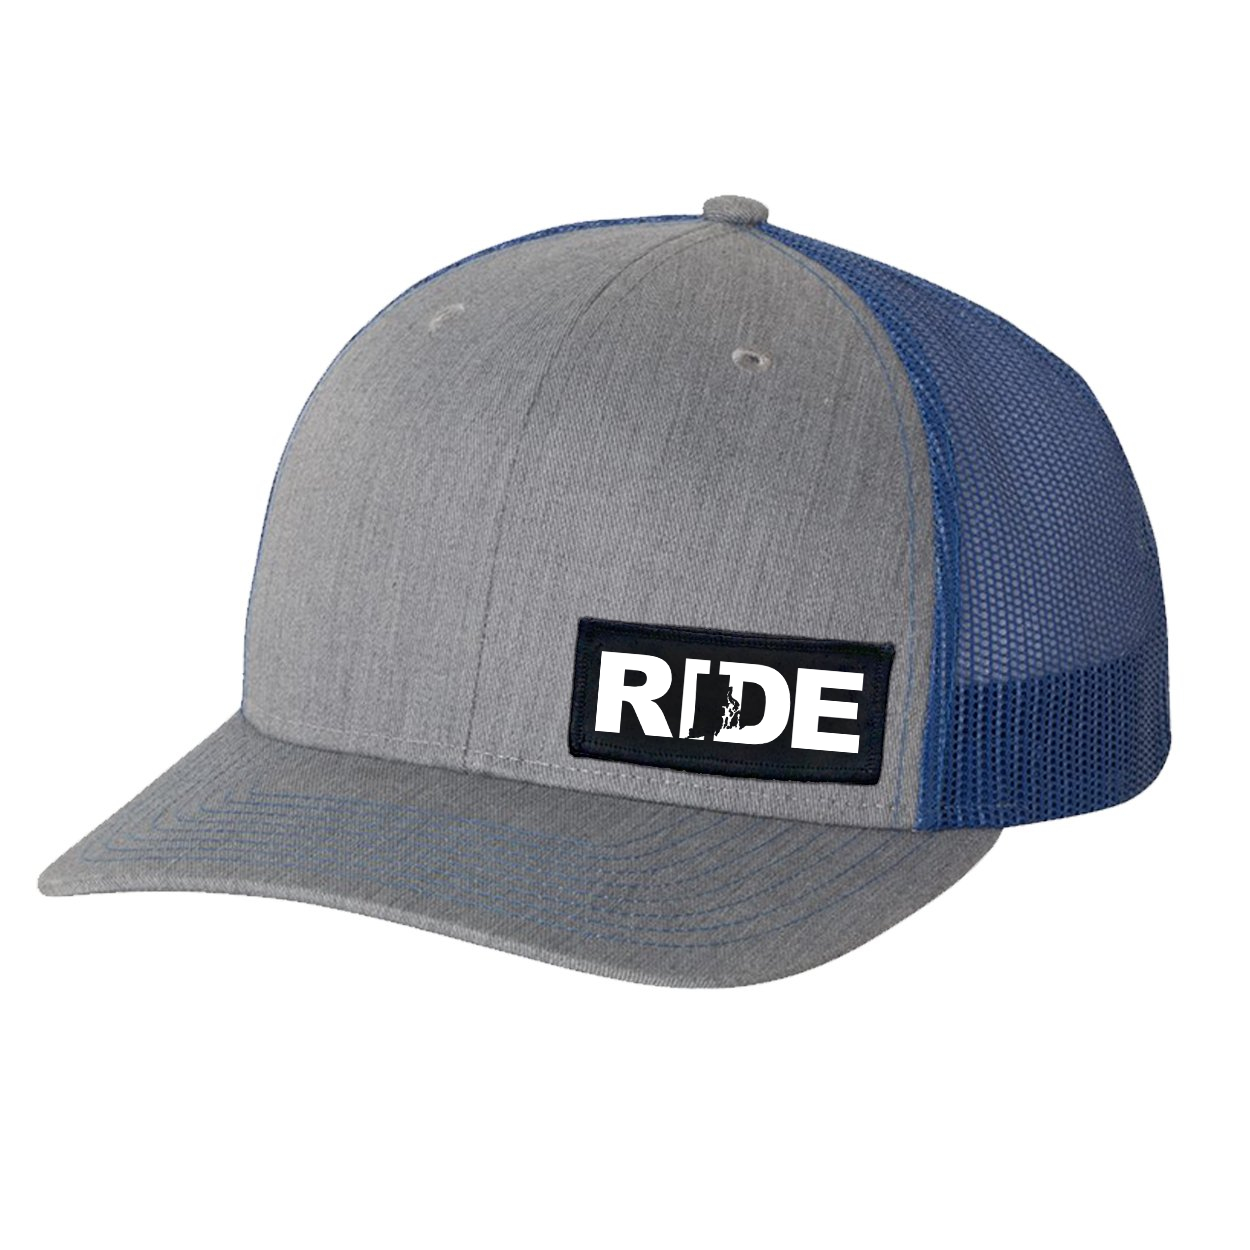 Ride Rhode Island Night Out Woven Patch Snapback Trucker Hat Heather Grey/Royal (White Logo)